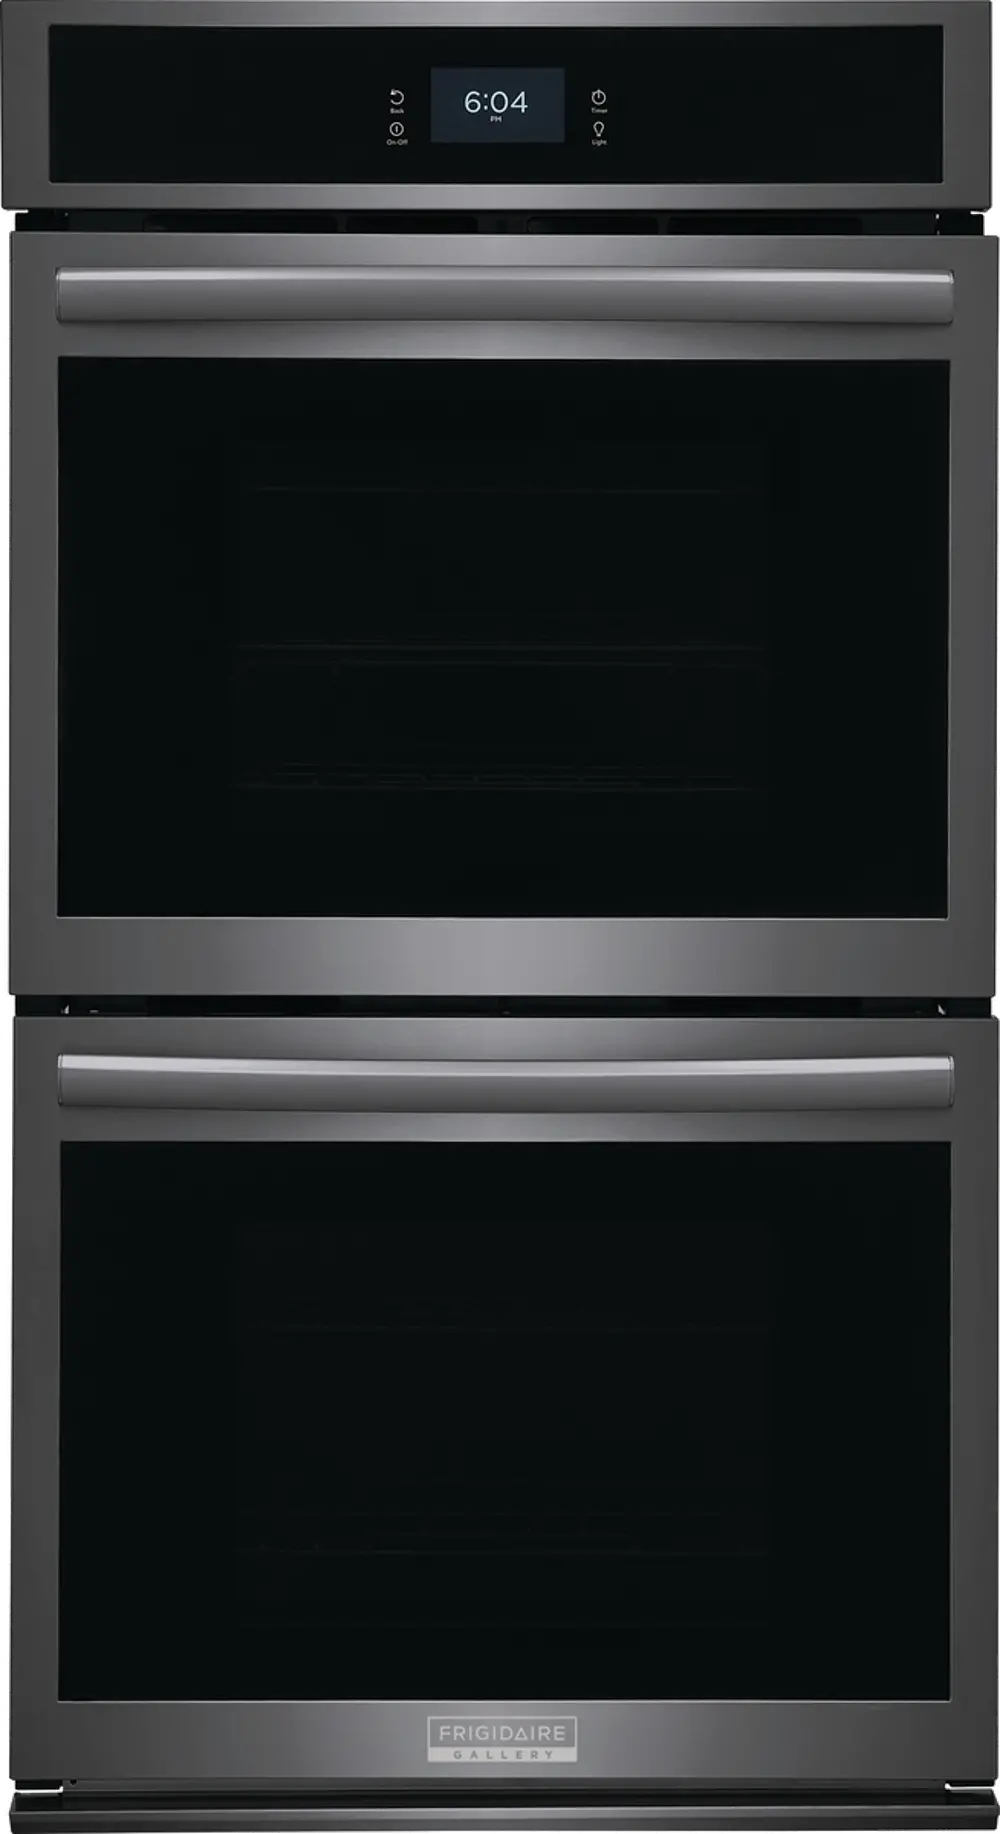 GCWD2767AD Frigidaire Gallery 7.6 cu ft Double Wall Oven - Black Stainless Steel 27 Inch-1